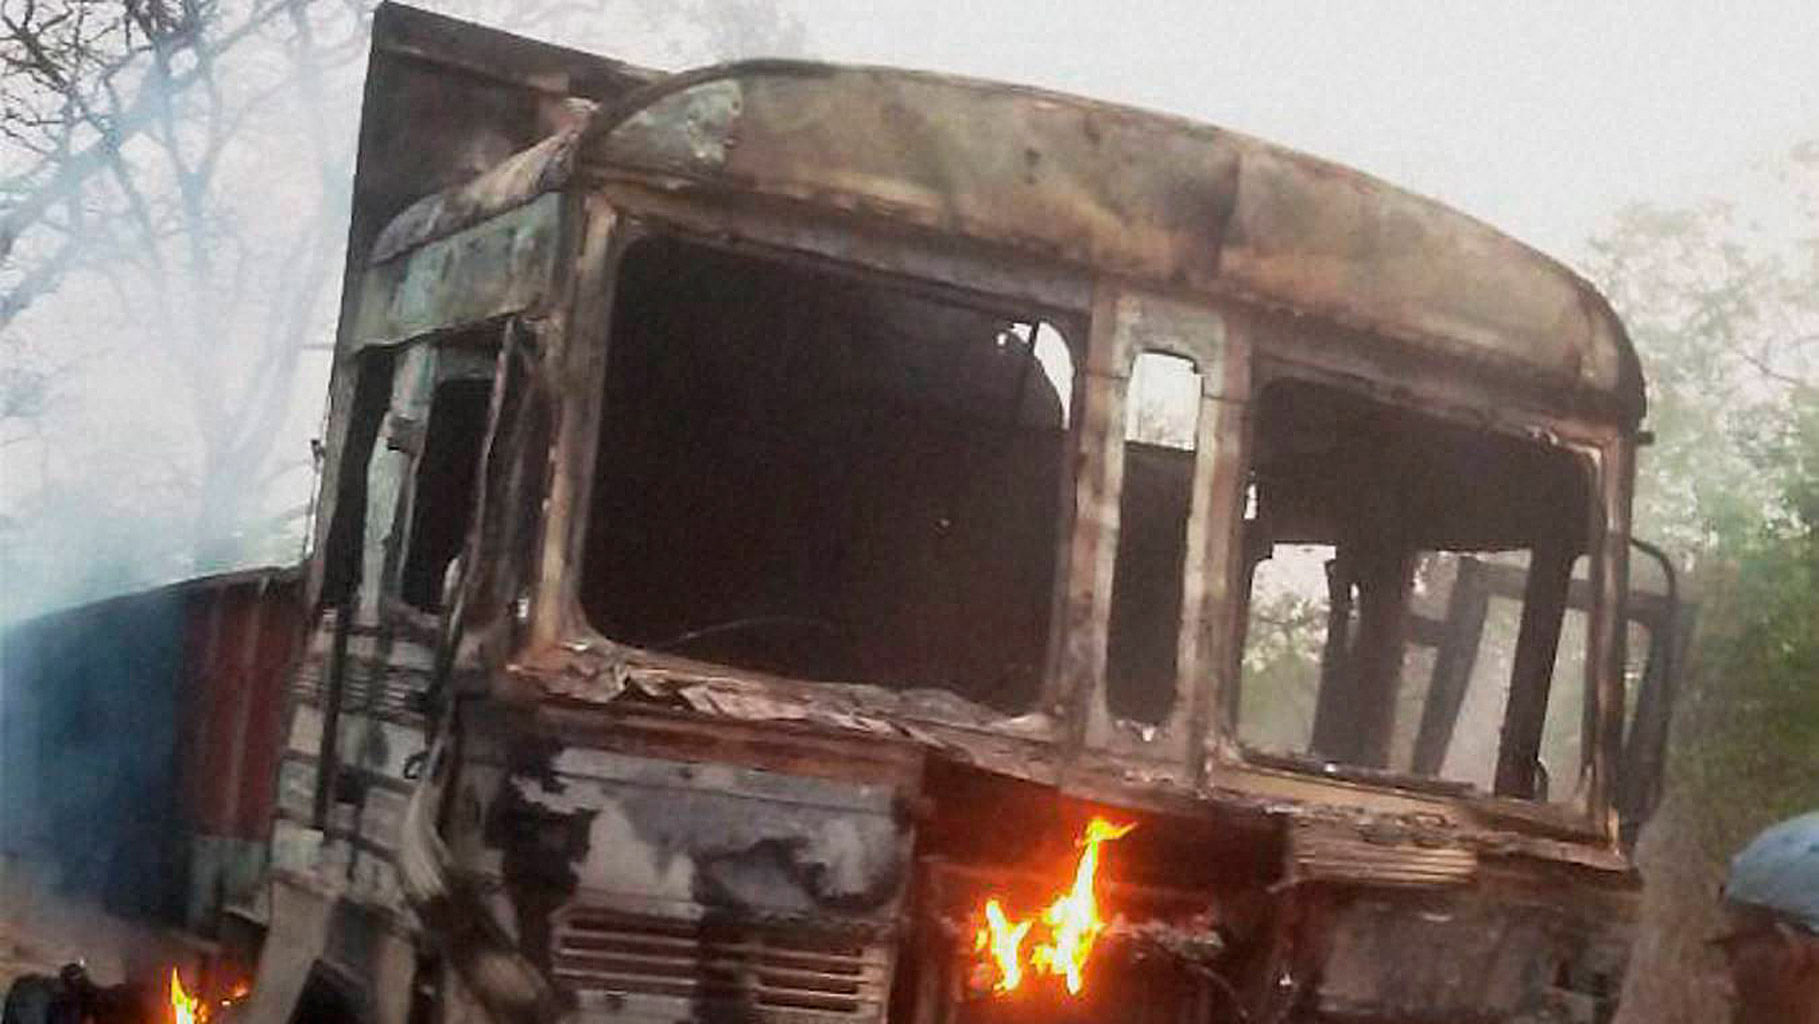 A truck was set on fire by Naxals in Dantewada on 18 April 2016. (Photo Courtesy: PTI)